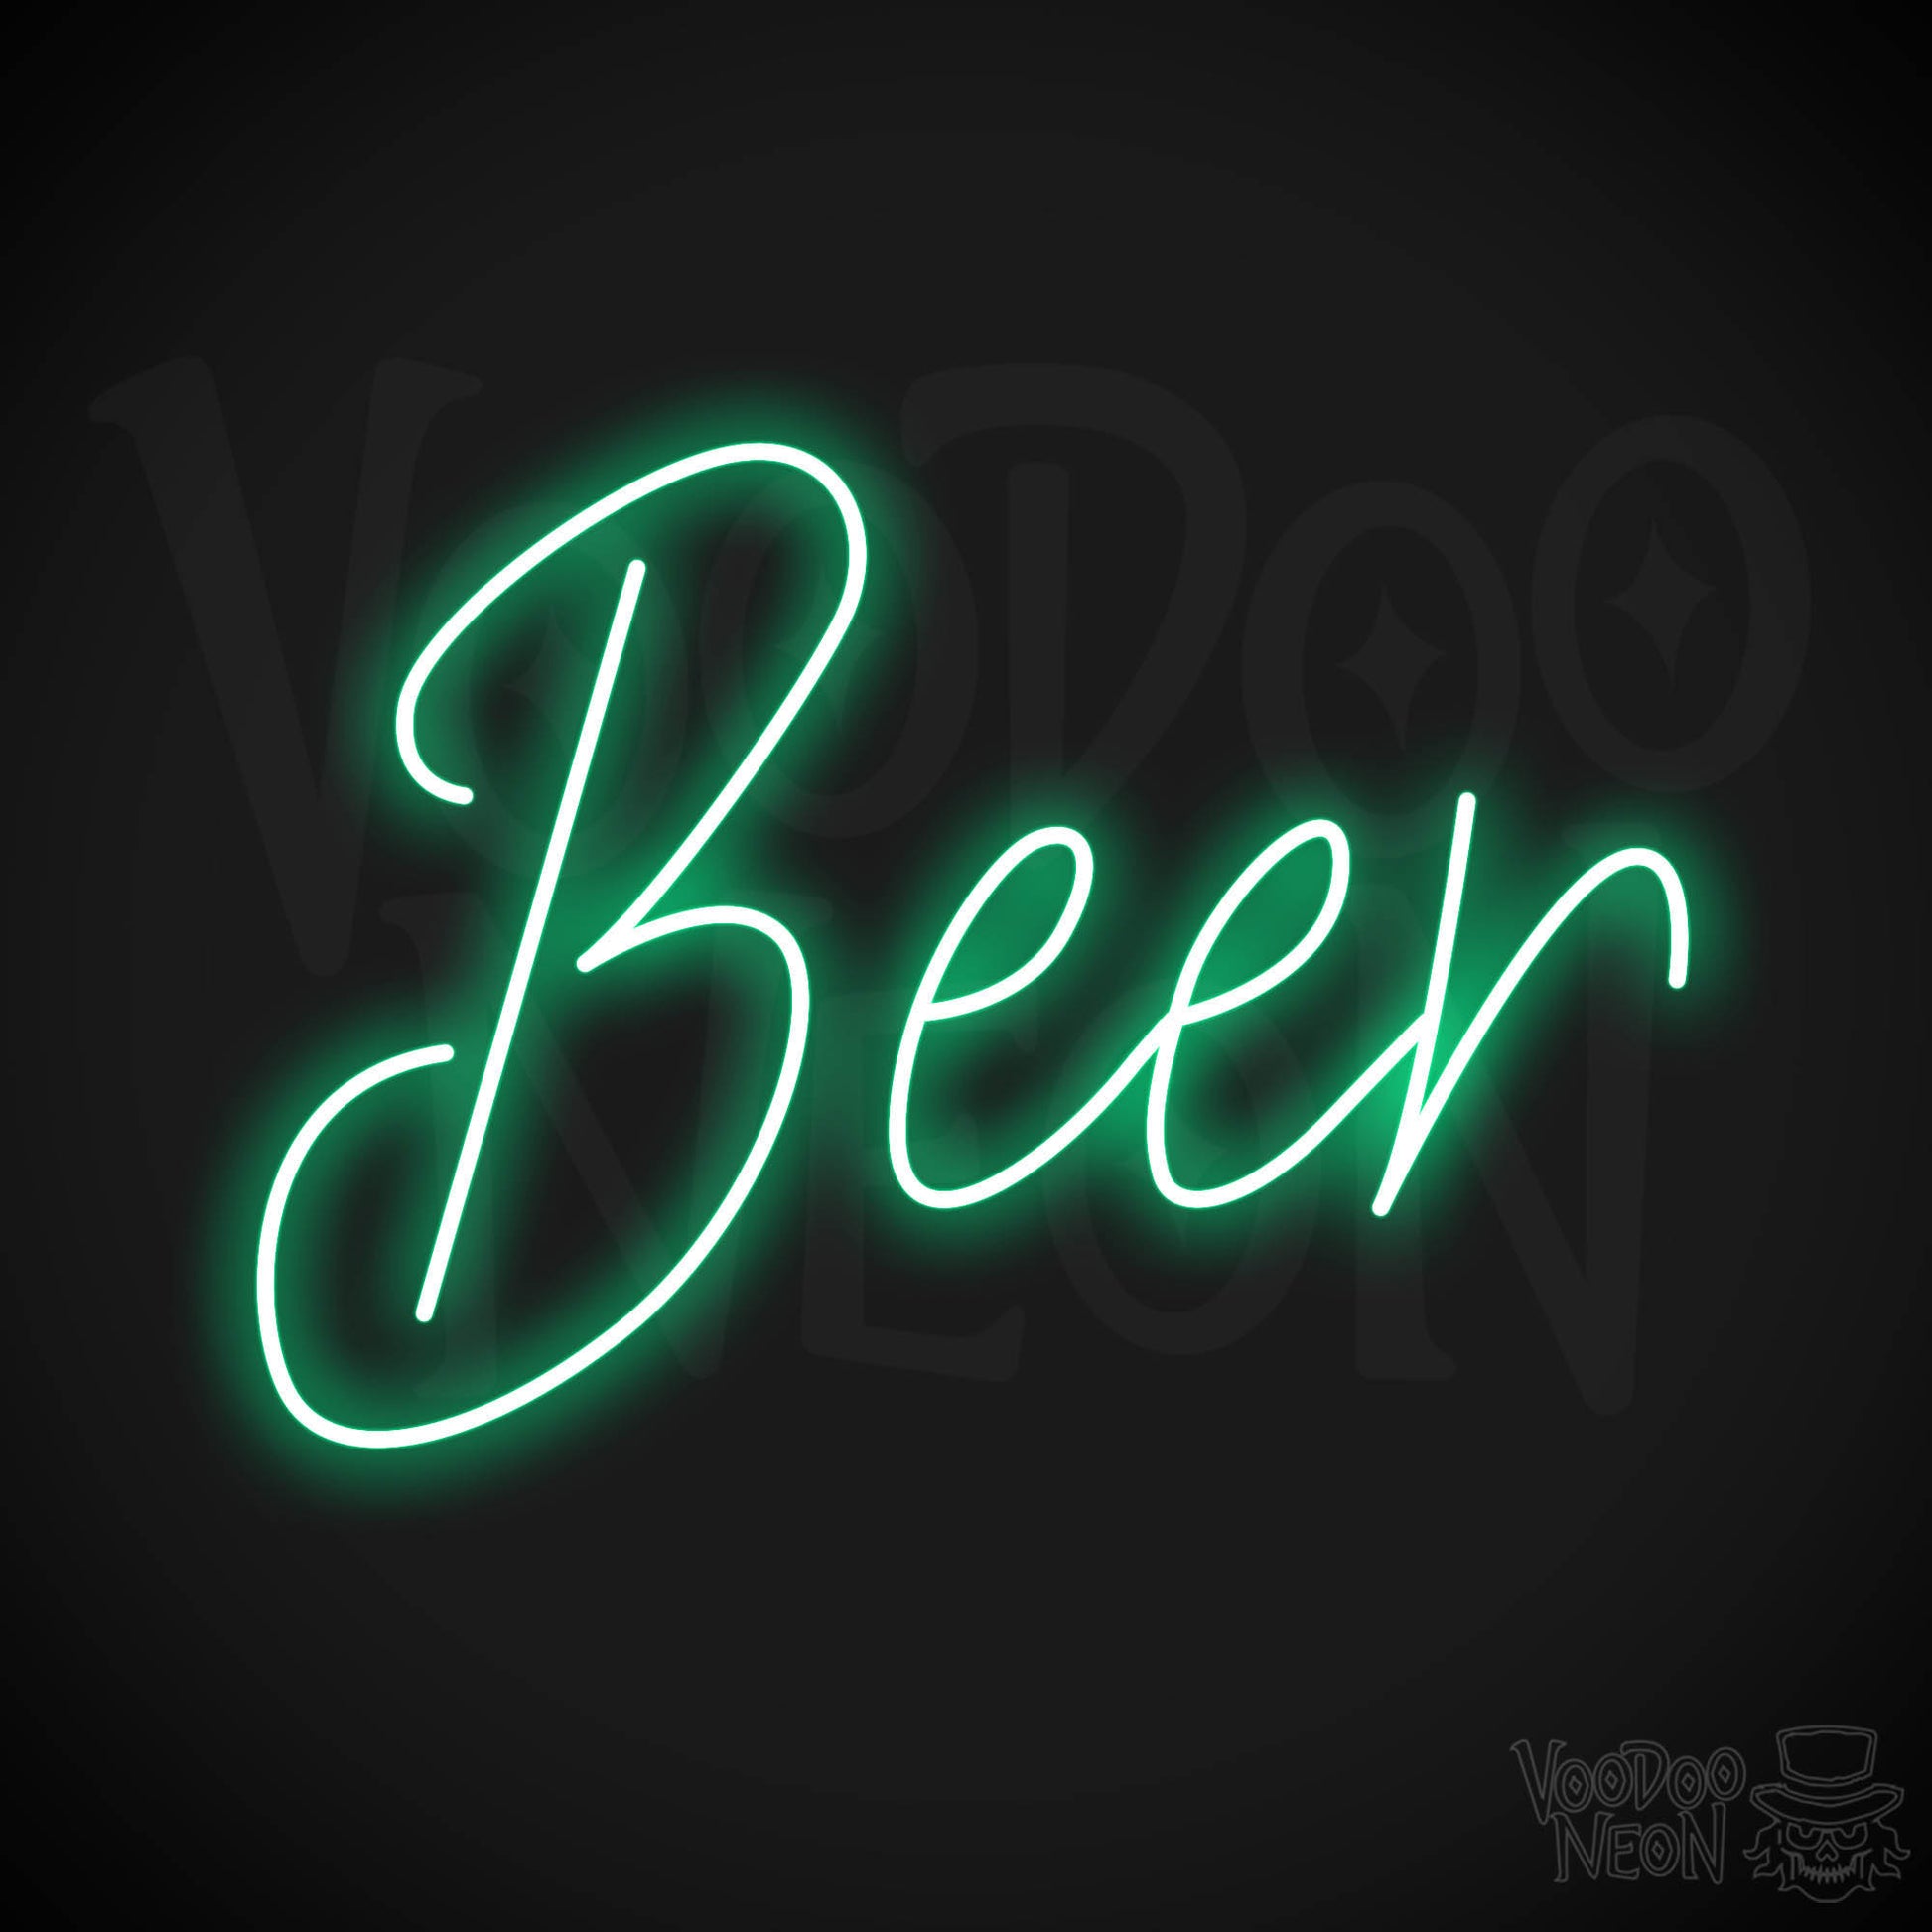 Beer LED Neon - Green